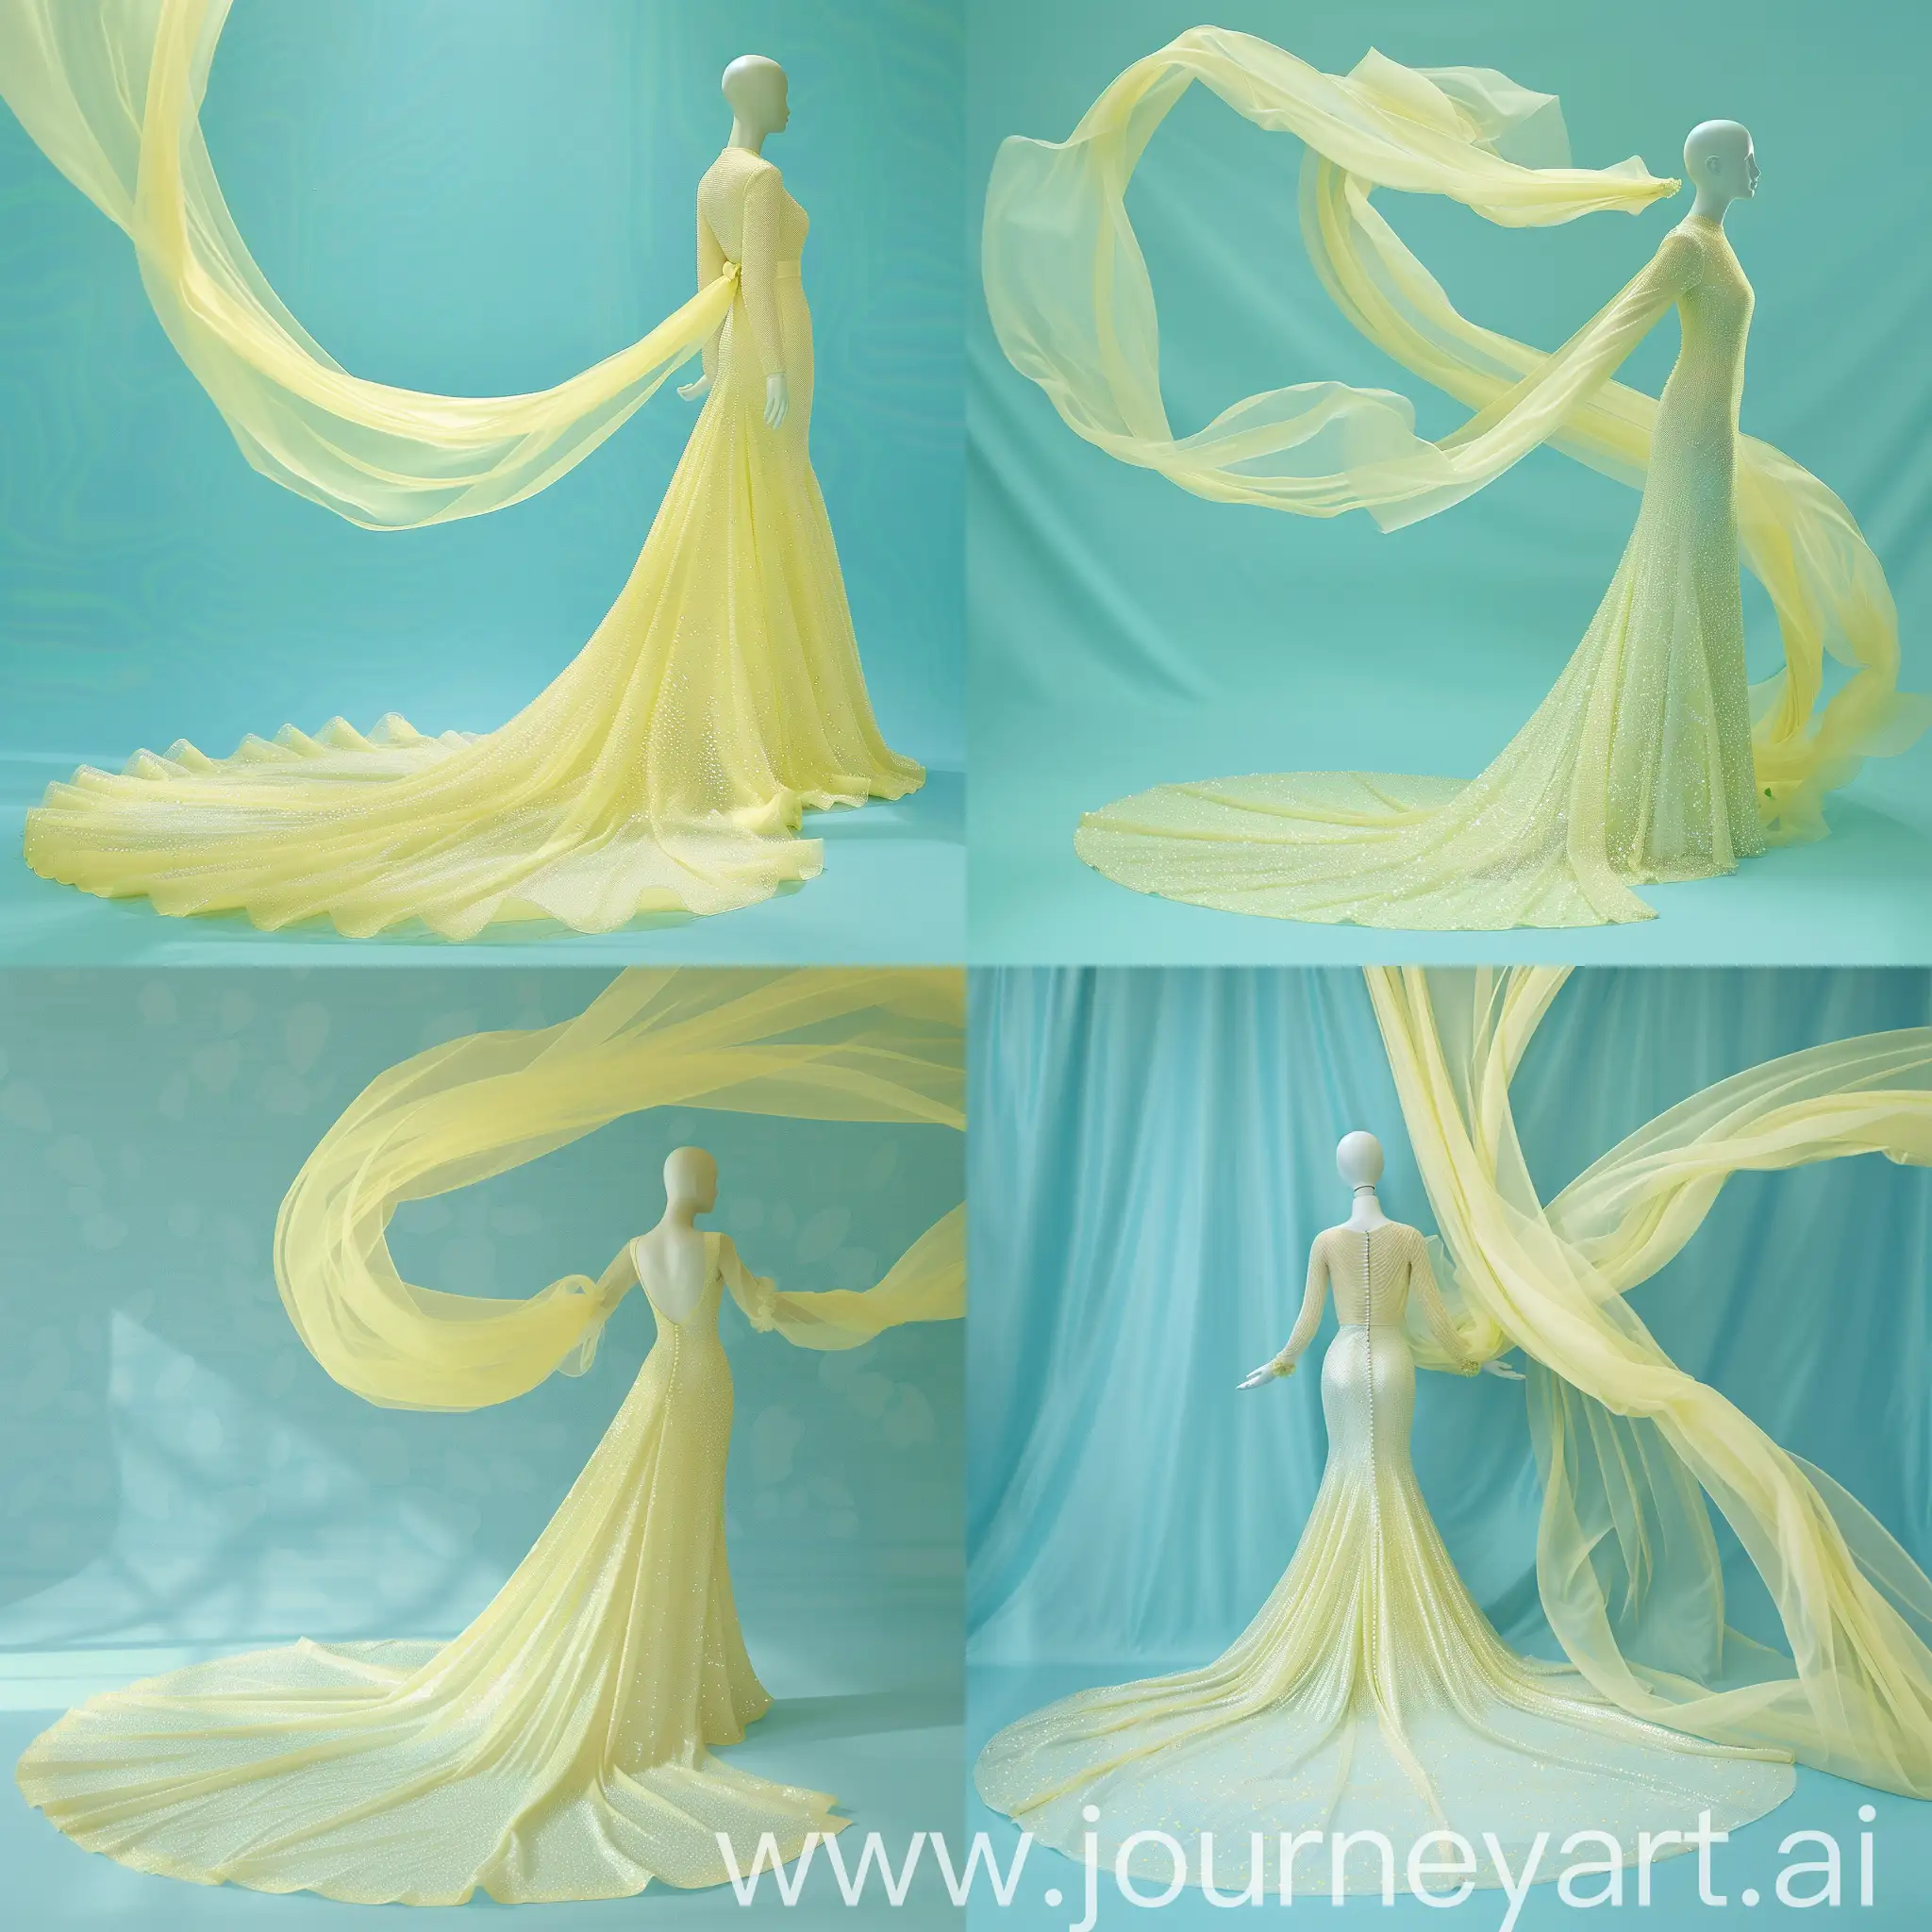 Chic-Pearl-Yellow-Dress-on-Mannequin-in-Aqua-Blue-Setting